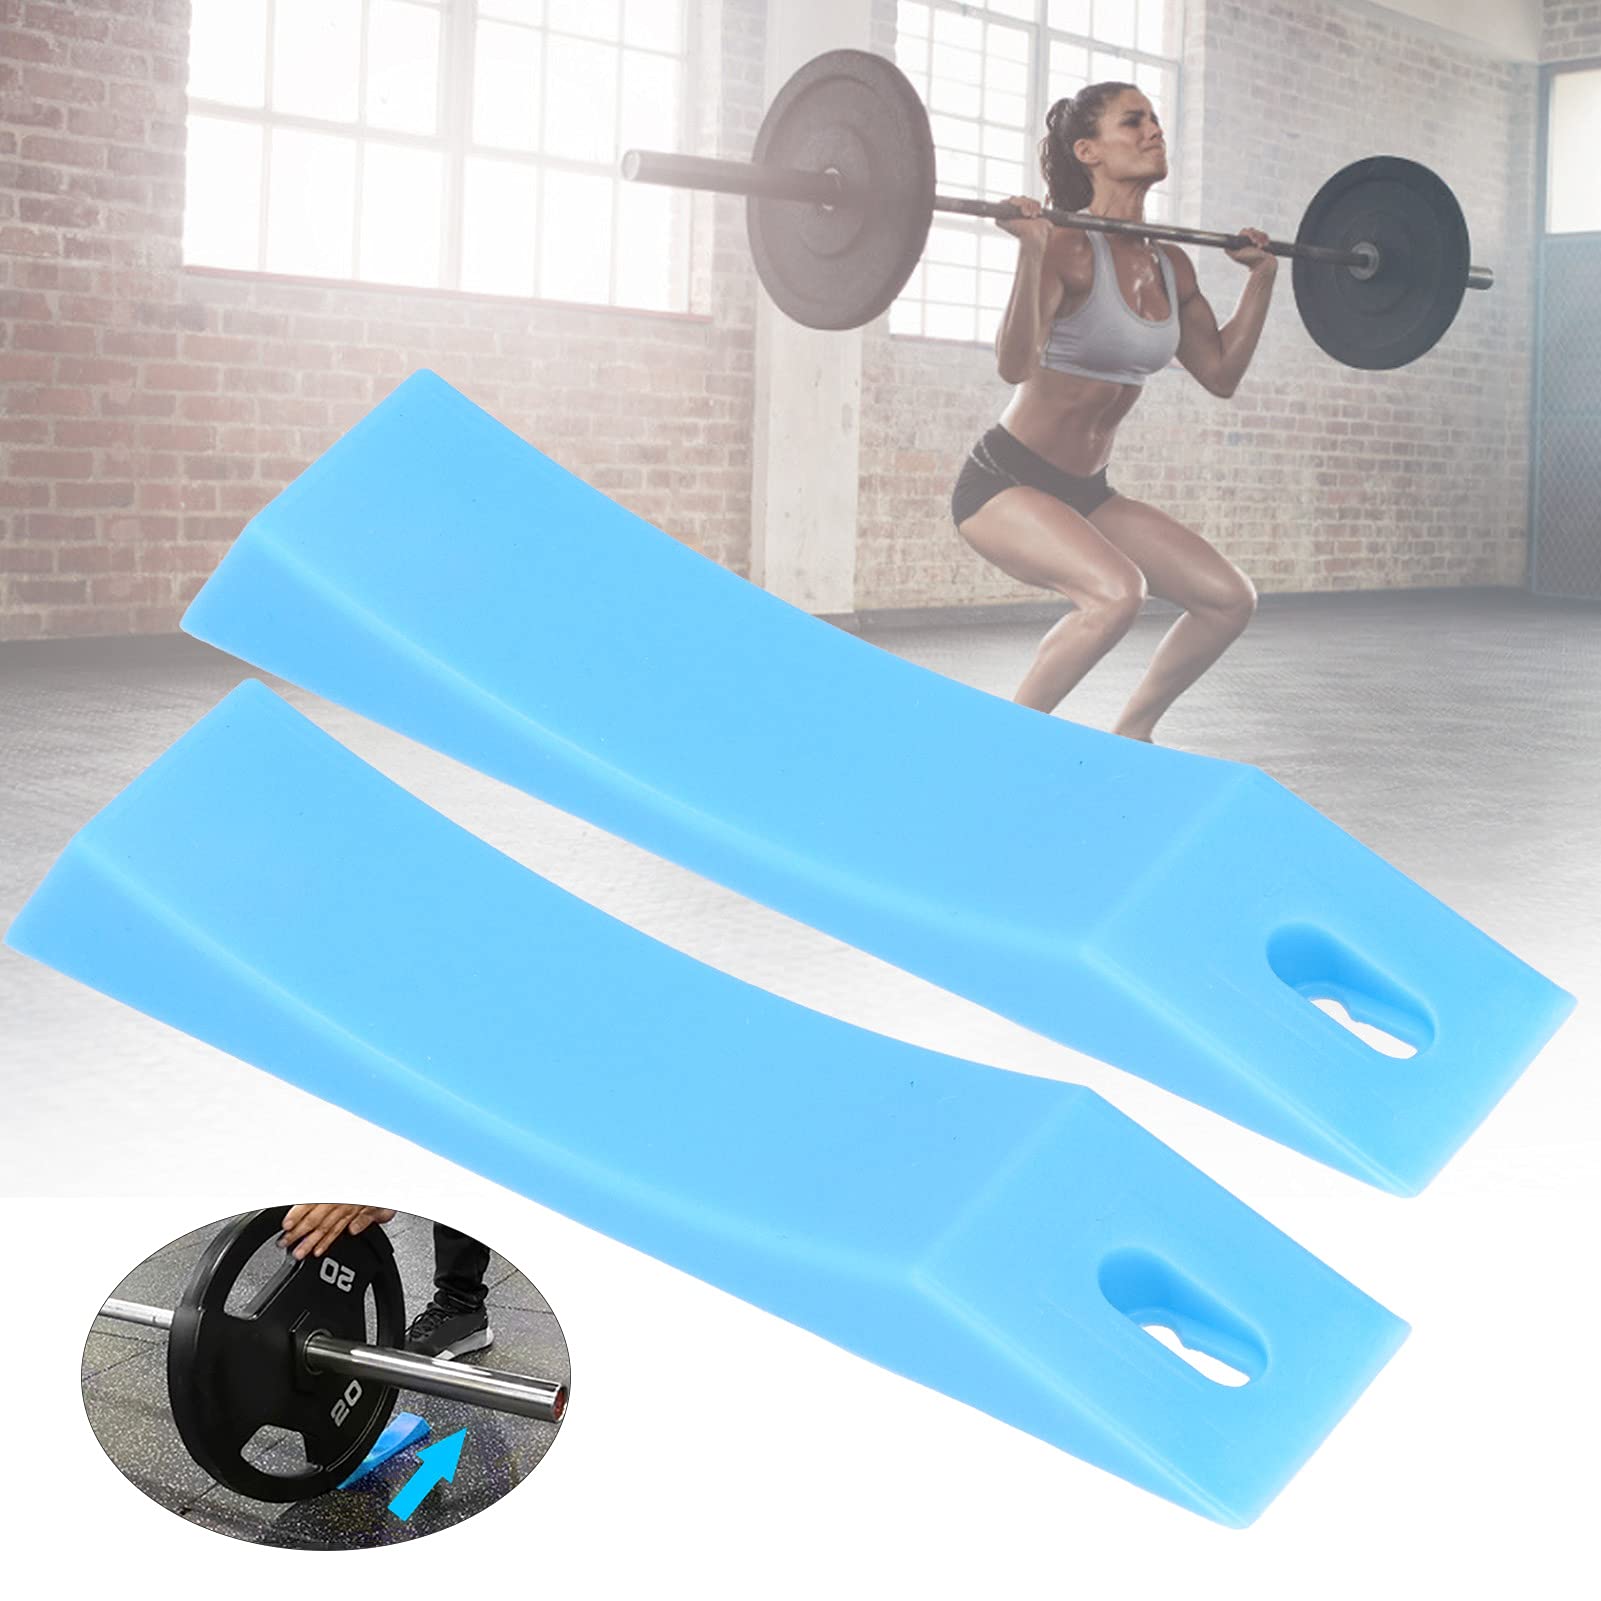 Stabilizer Supports Barbell Squat Sponge Pad Dead Wedge